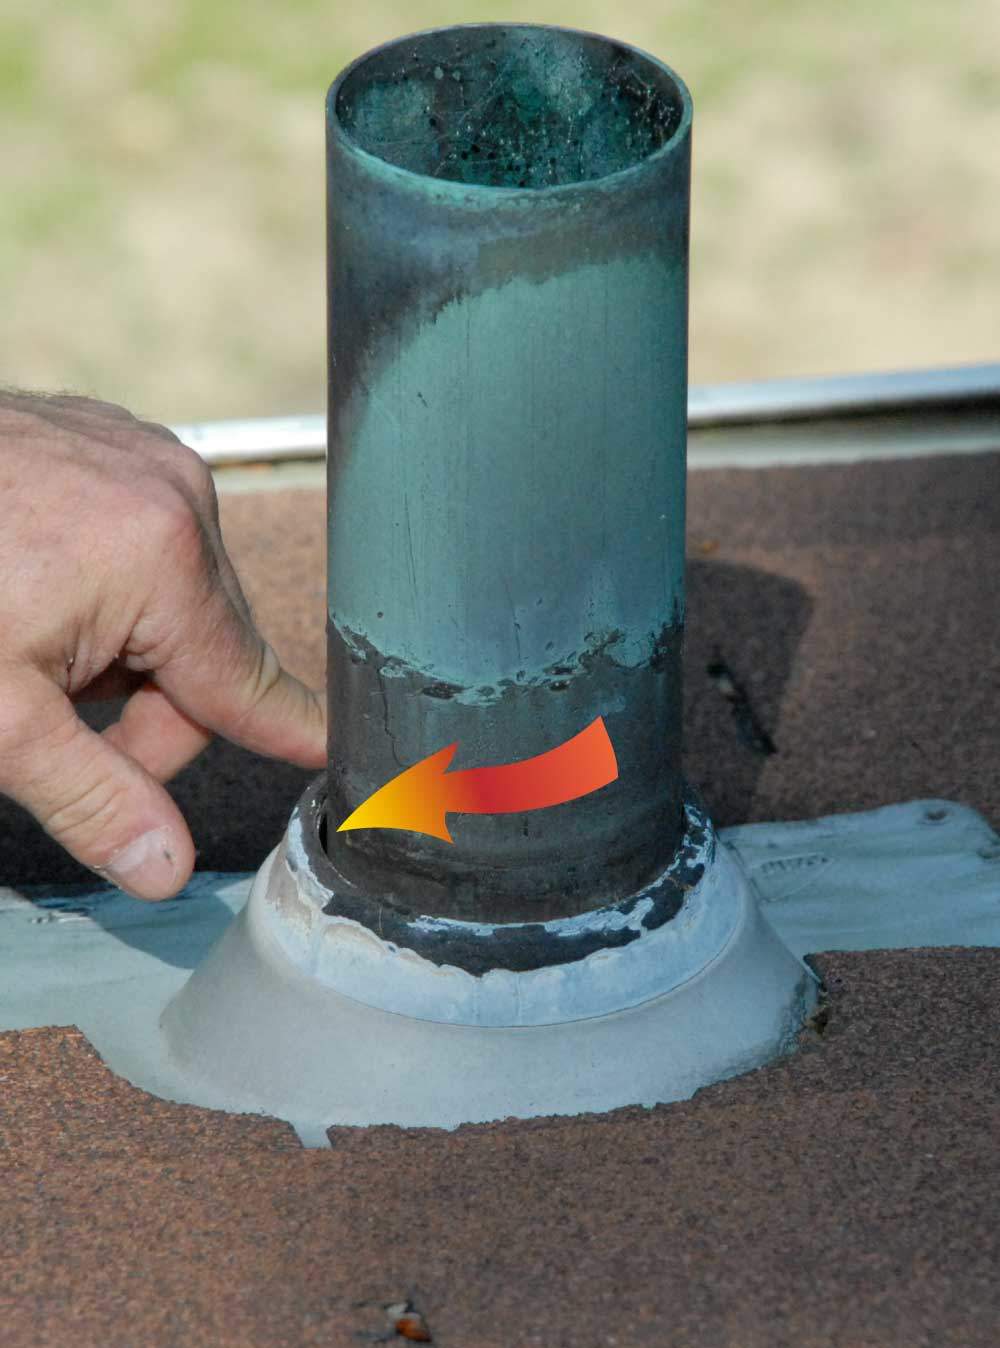 Costly Flat Roof Leaks - 10 steps to Find and Repair Leaks DIY 1